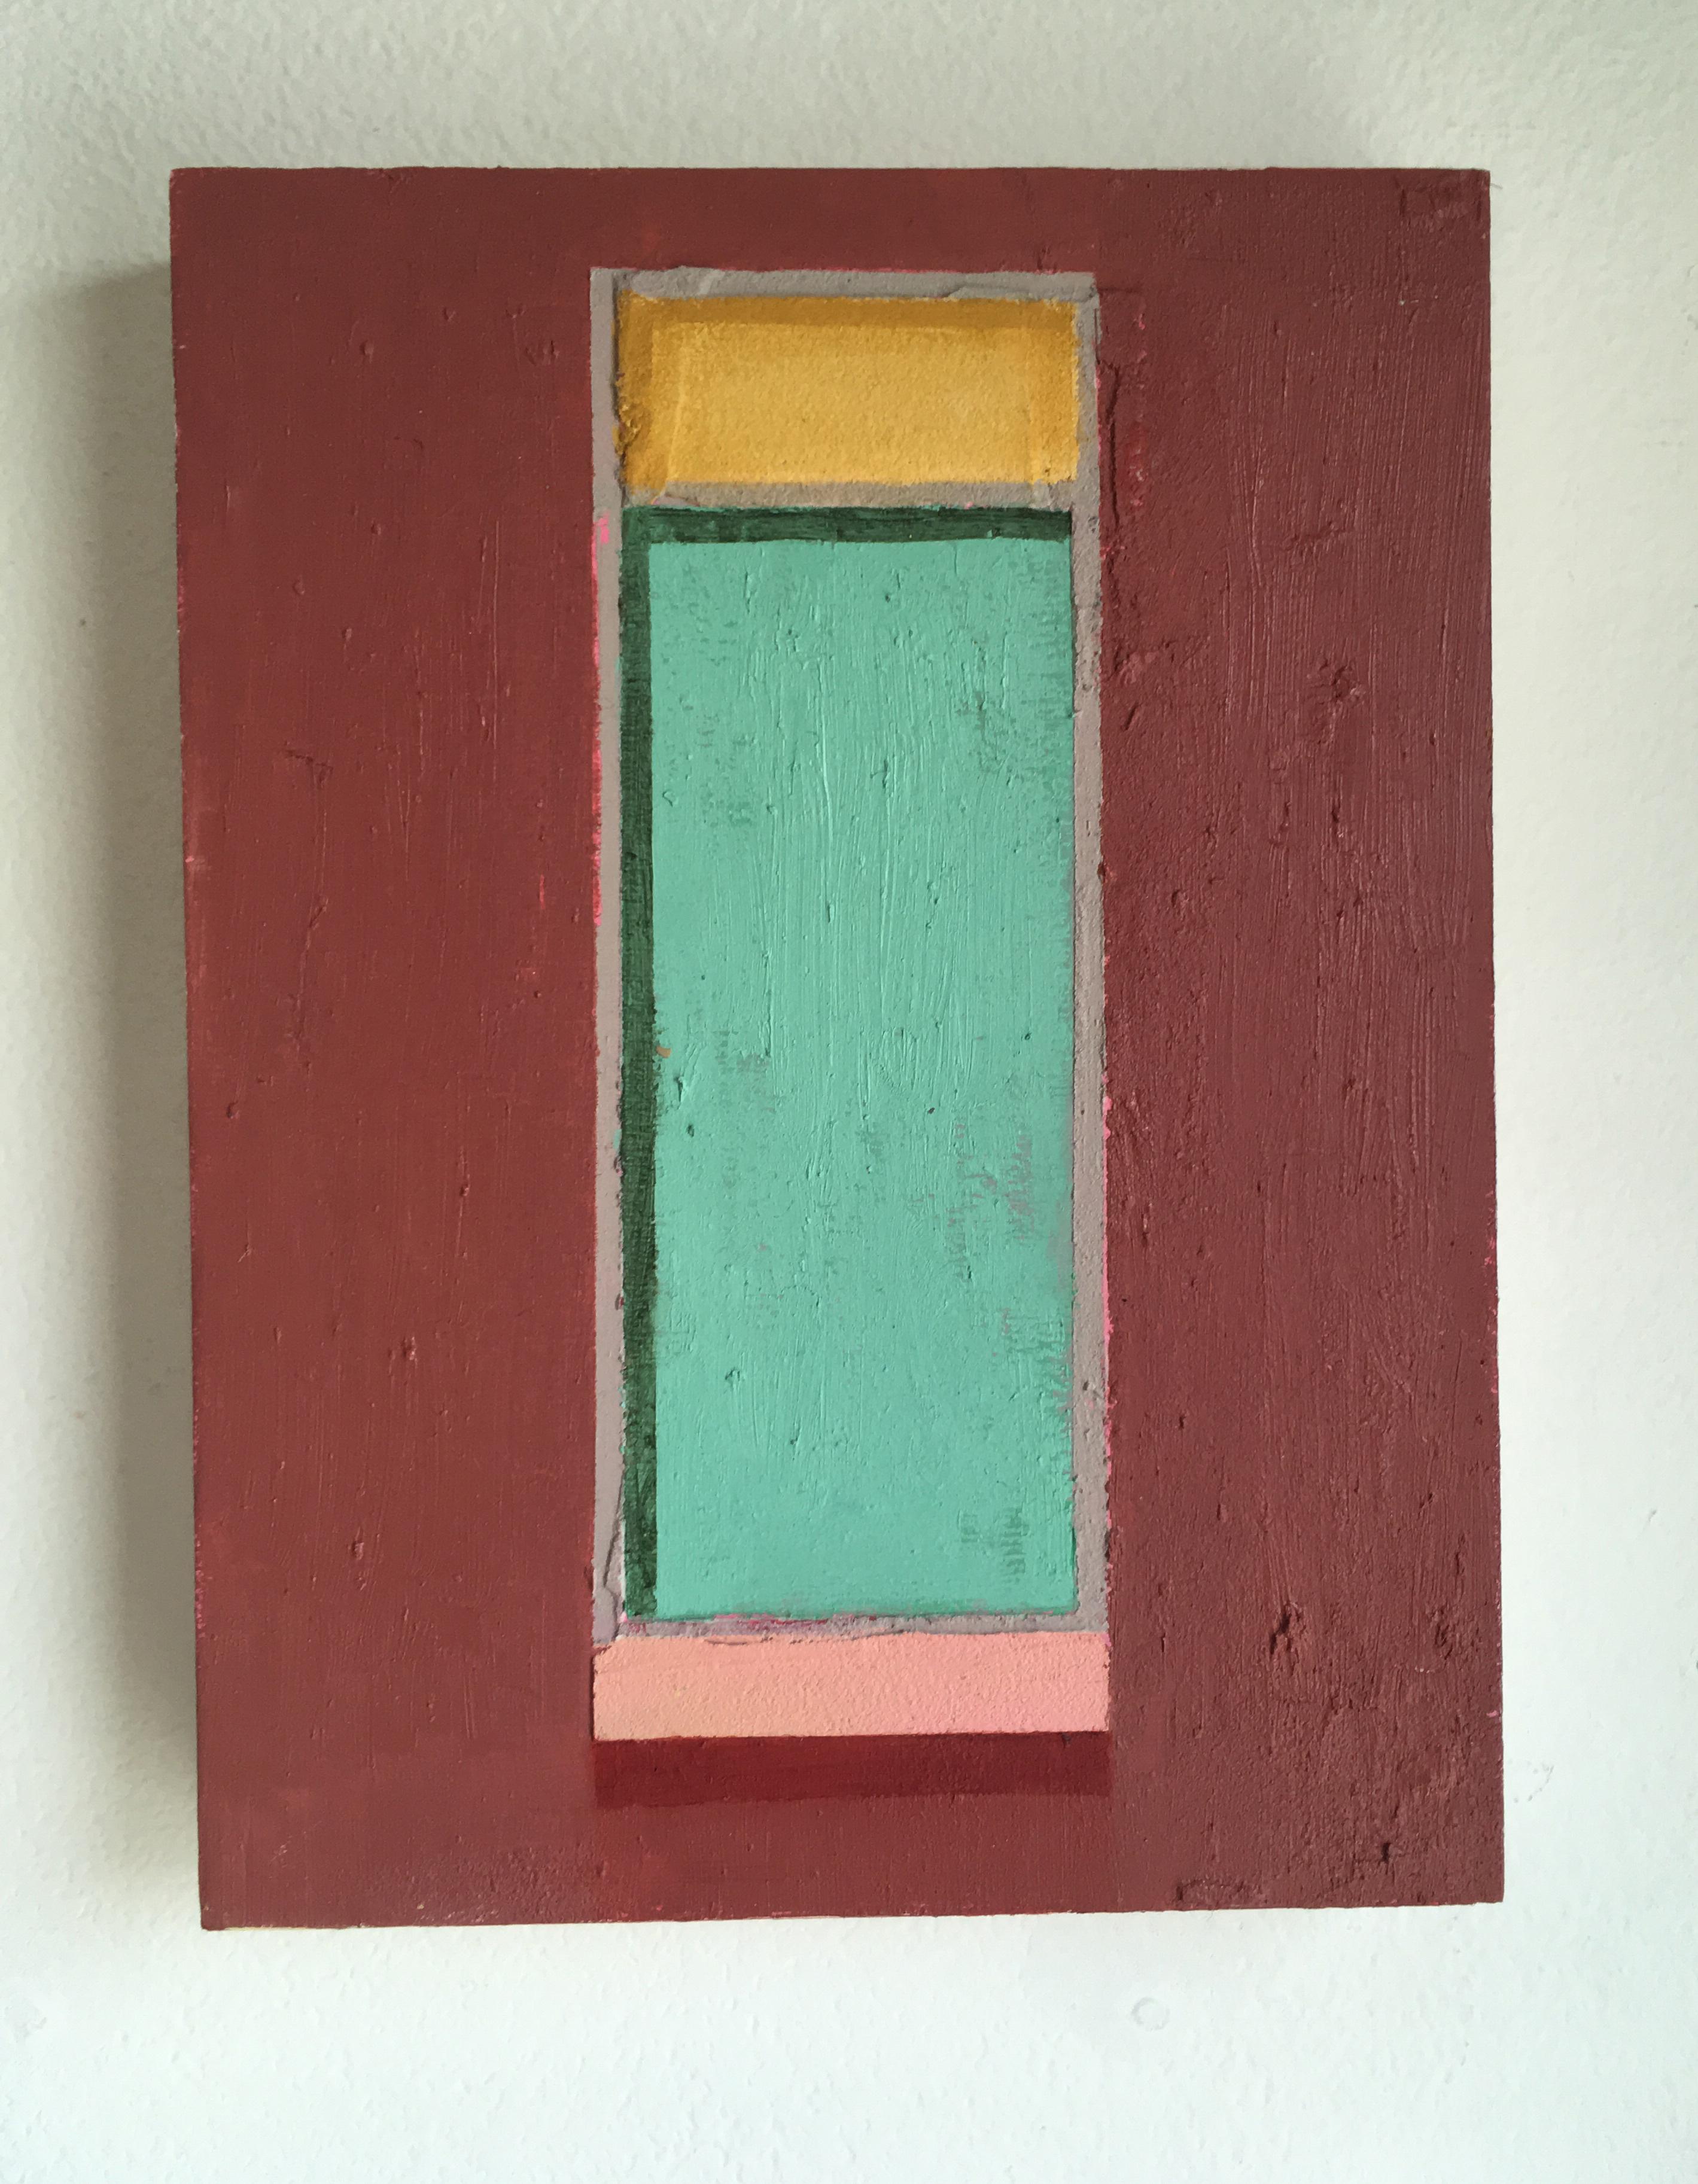 Francesca Reyes Figurative Painting - "Door #30 (Bright)" Oil & acrylic painting on panel, earth tones, architecture